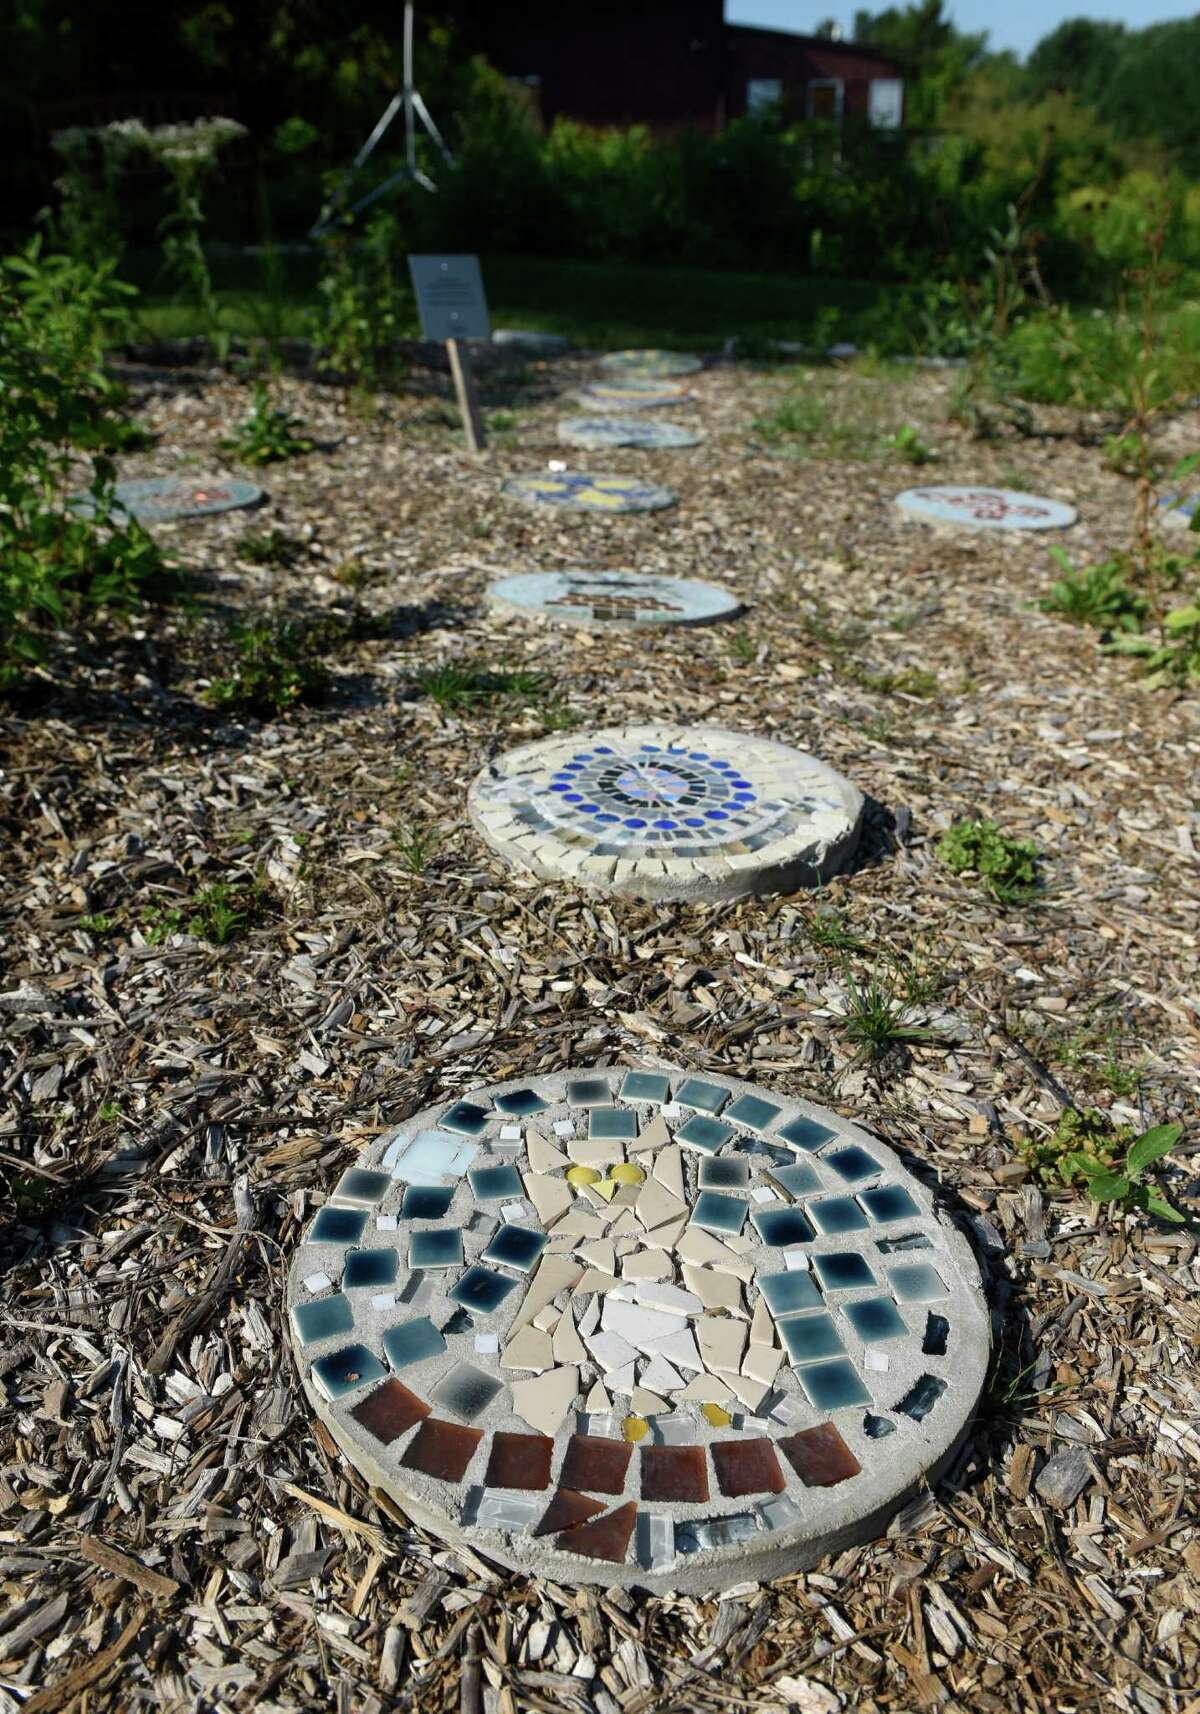 Stepping stones created by students at Carmel Academy line the sensory garden of the Nature Play Trail at the Audubon Greenwich in Greenwich, Conn. Wednesday, Aug. 24, 2016. Carmel art students created colorful, nature-themed mosaics on the stepping stones for the sensory garden.